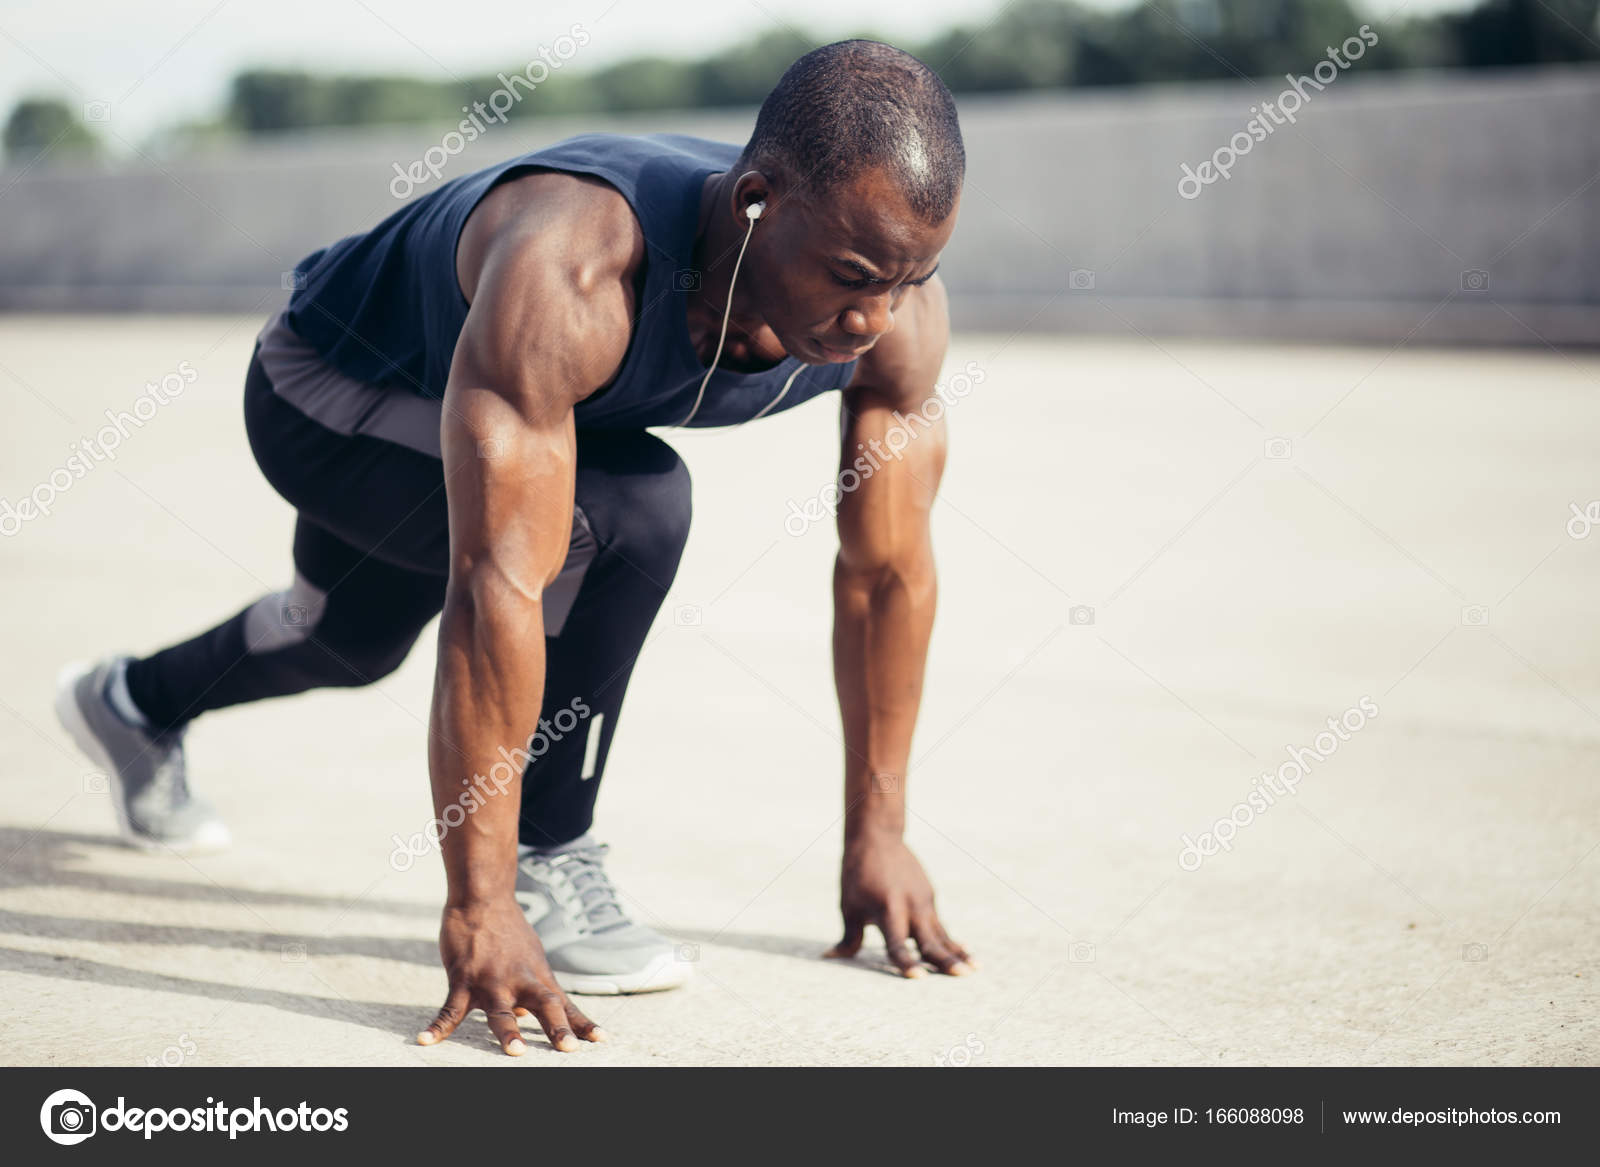 50,852 Running Poses Woman Images, Stock Photos, 3D objects, & Vectors |  Shutterstock